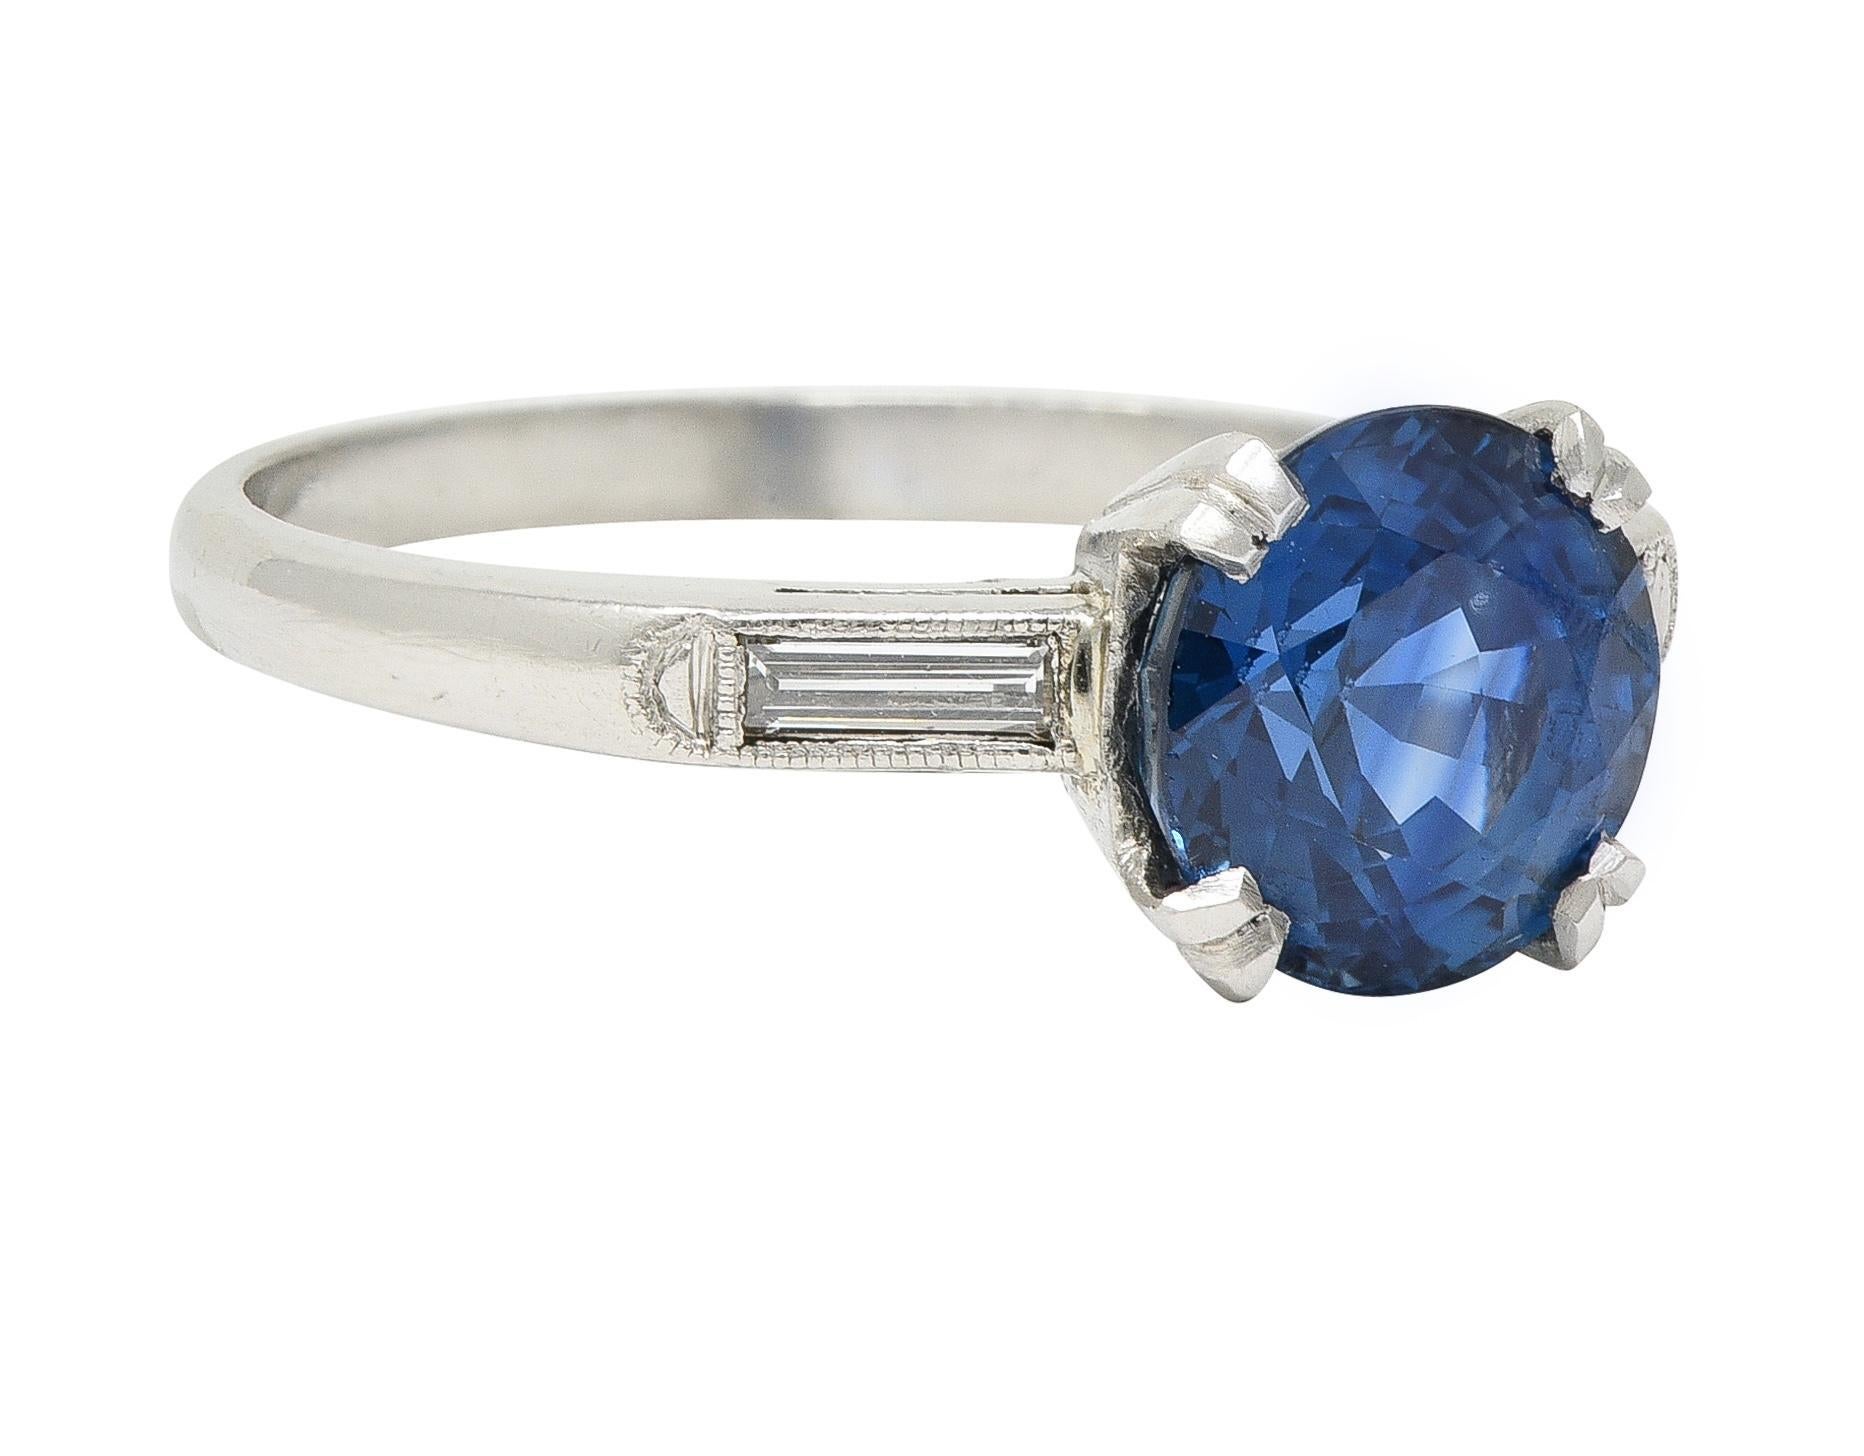 Centering a round cut sapphire weighing 2.80 carats - transparent medium-dark blue
Natural Thai in origin with no indications of heat treatment 
Set with split prongs in a pierced foliate motif basket
Flanked by cathedral shoulders bezel set with